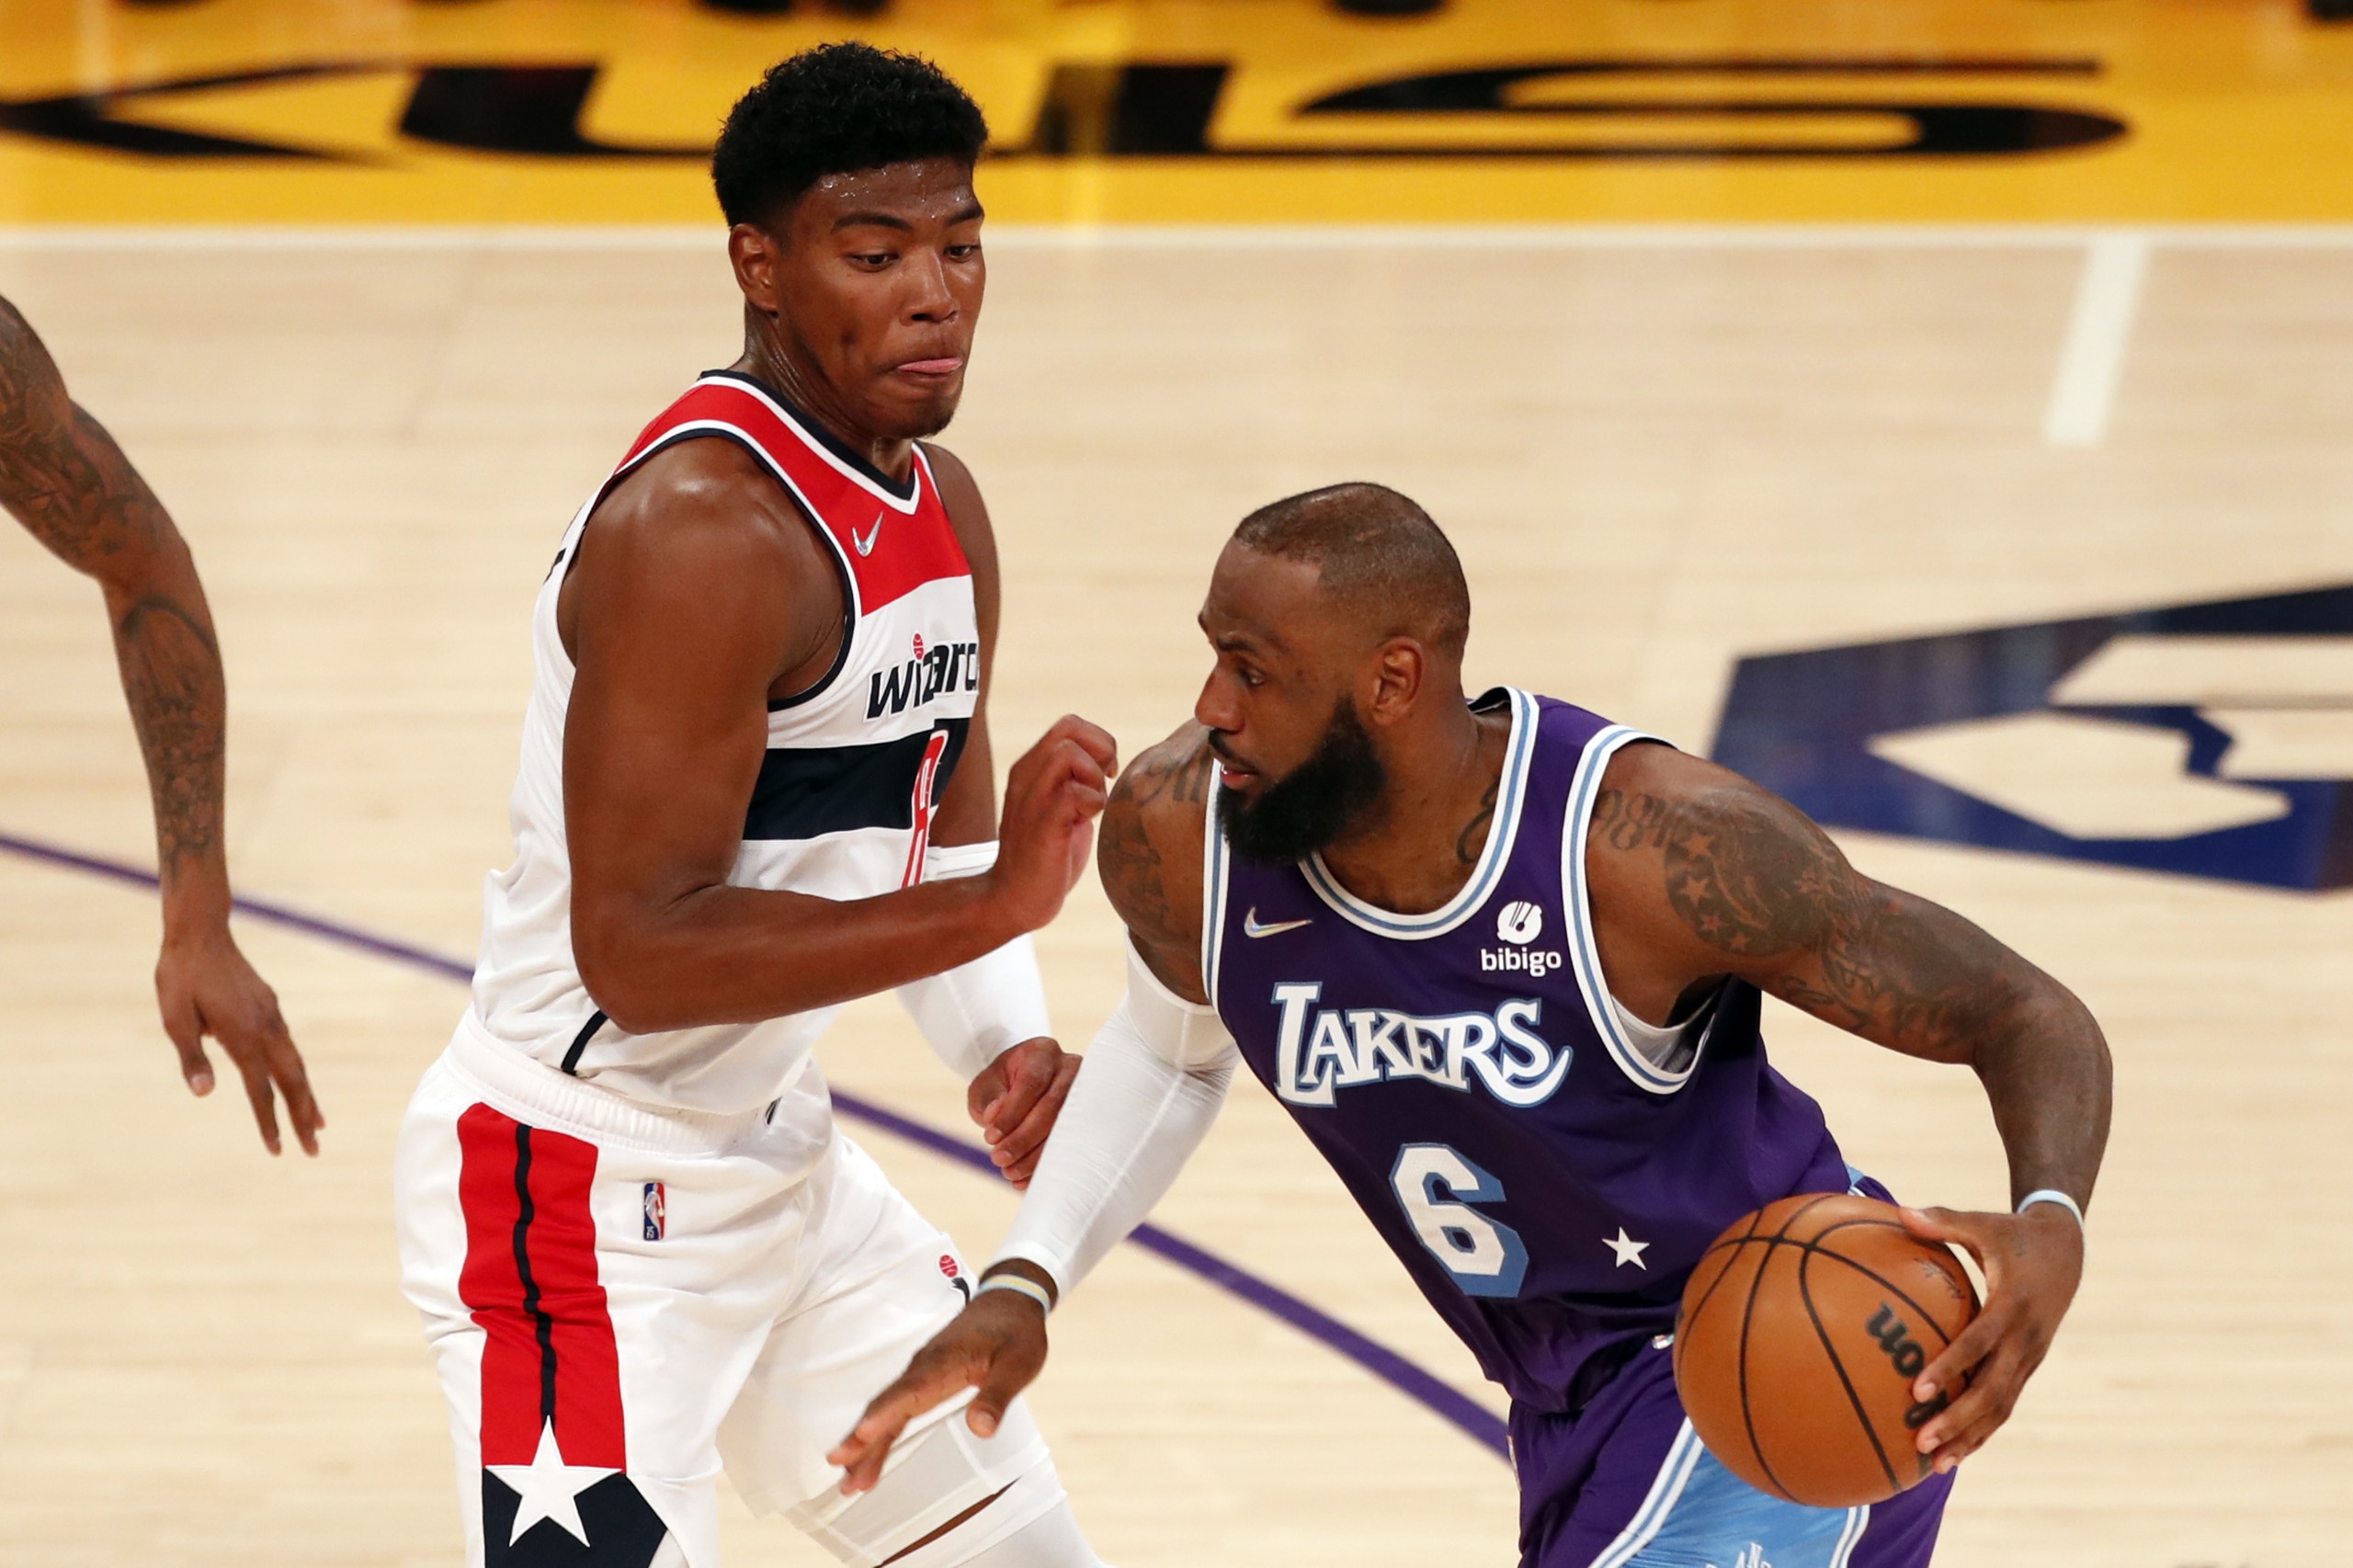 epa09818525 Los Angeles Lakers forward LeBron James (R) in action against Washington Wizards forward Rui Hachimura during the second quarter of the NBA game between the Los Angeles Lakers and the Washington Wizards at the Crypto.com Arena in Los Angeles, California, USA, 11 March 2022.  EPA/ETIENNE LAURENT  SHUTTERSTOCK OUT